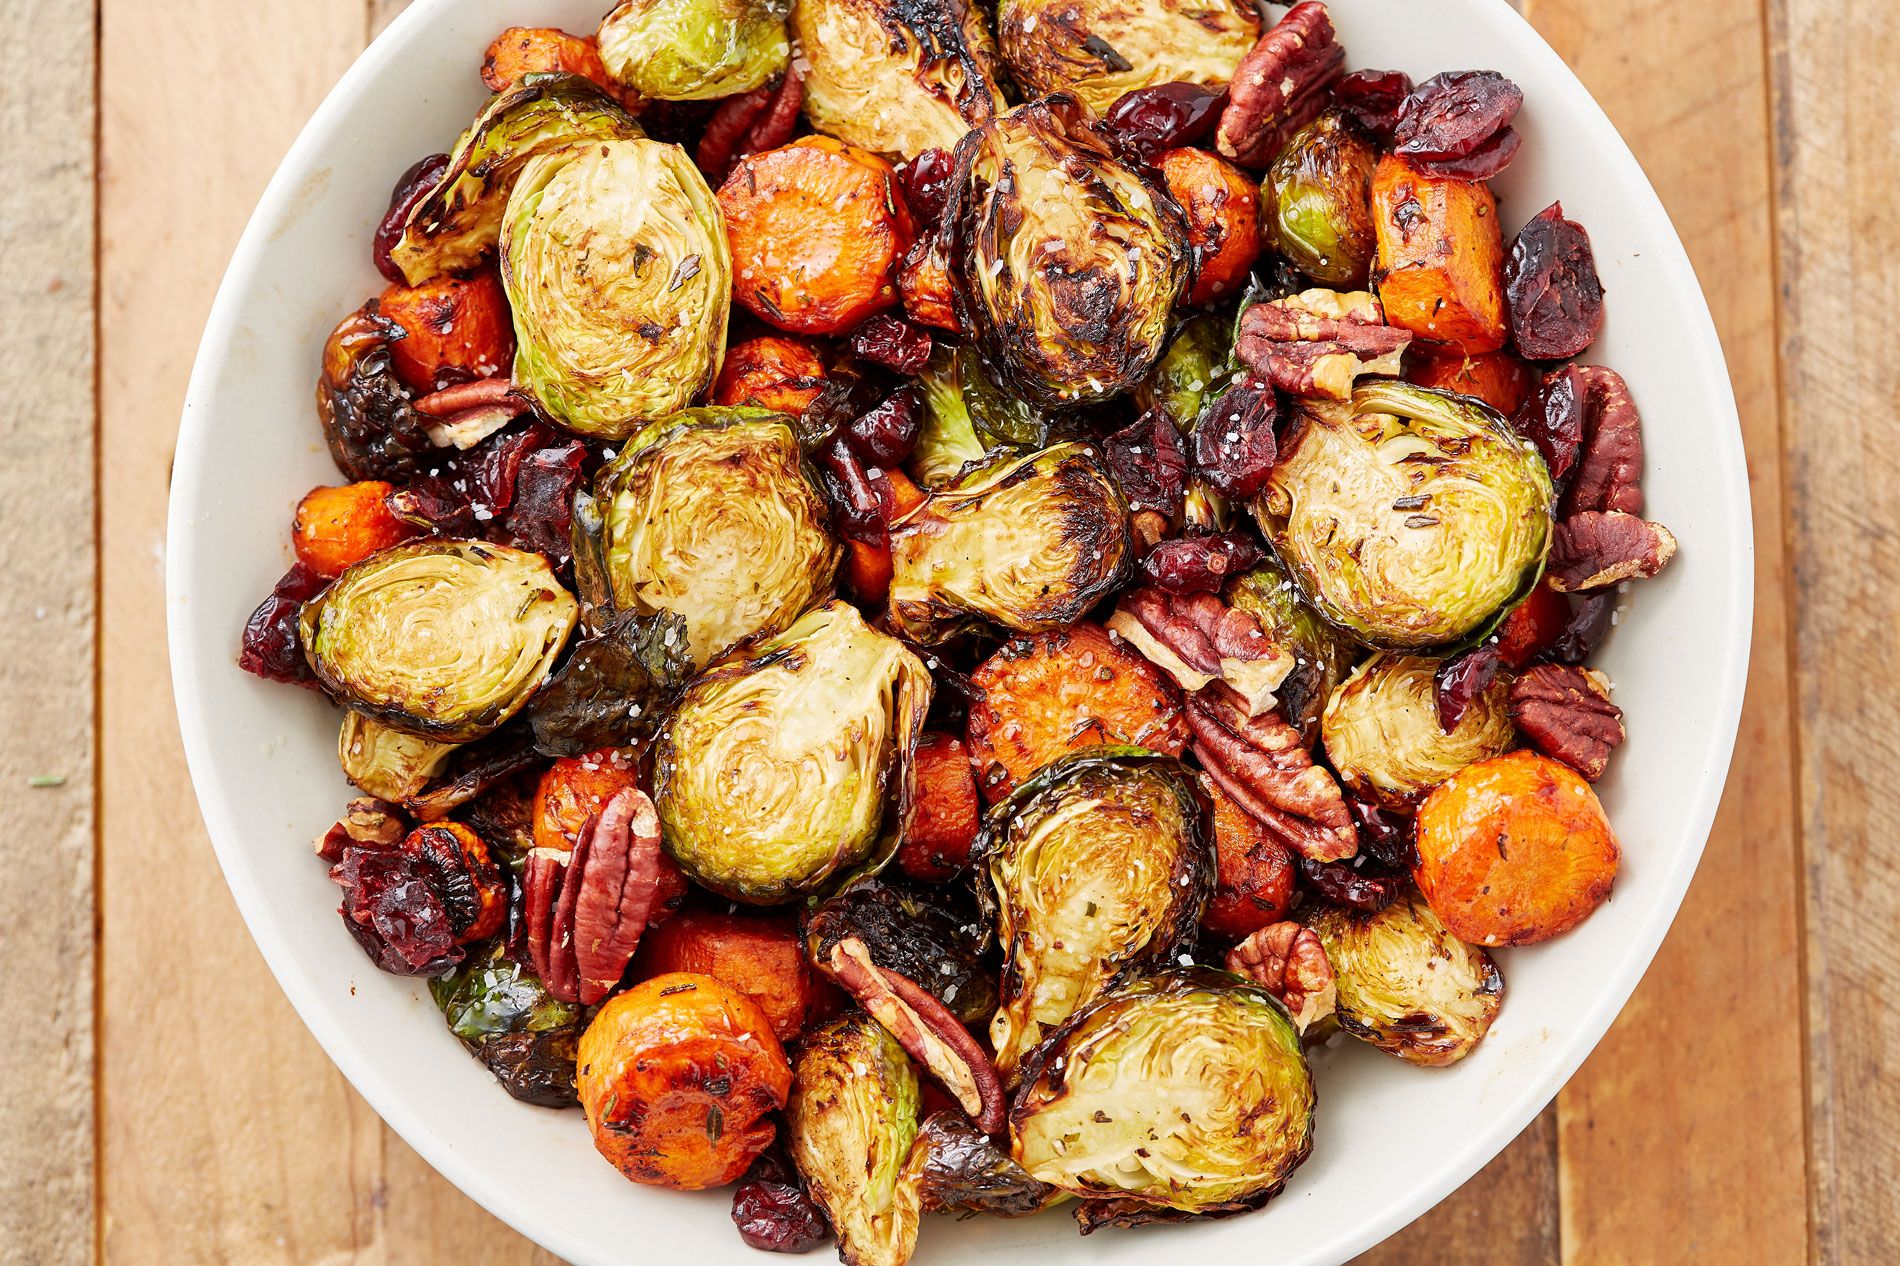 III. Preparation and Seasoning for Oven-Roasted Vegetable Medley